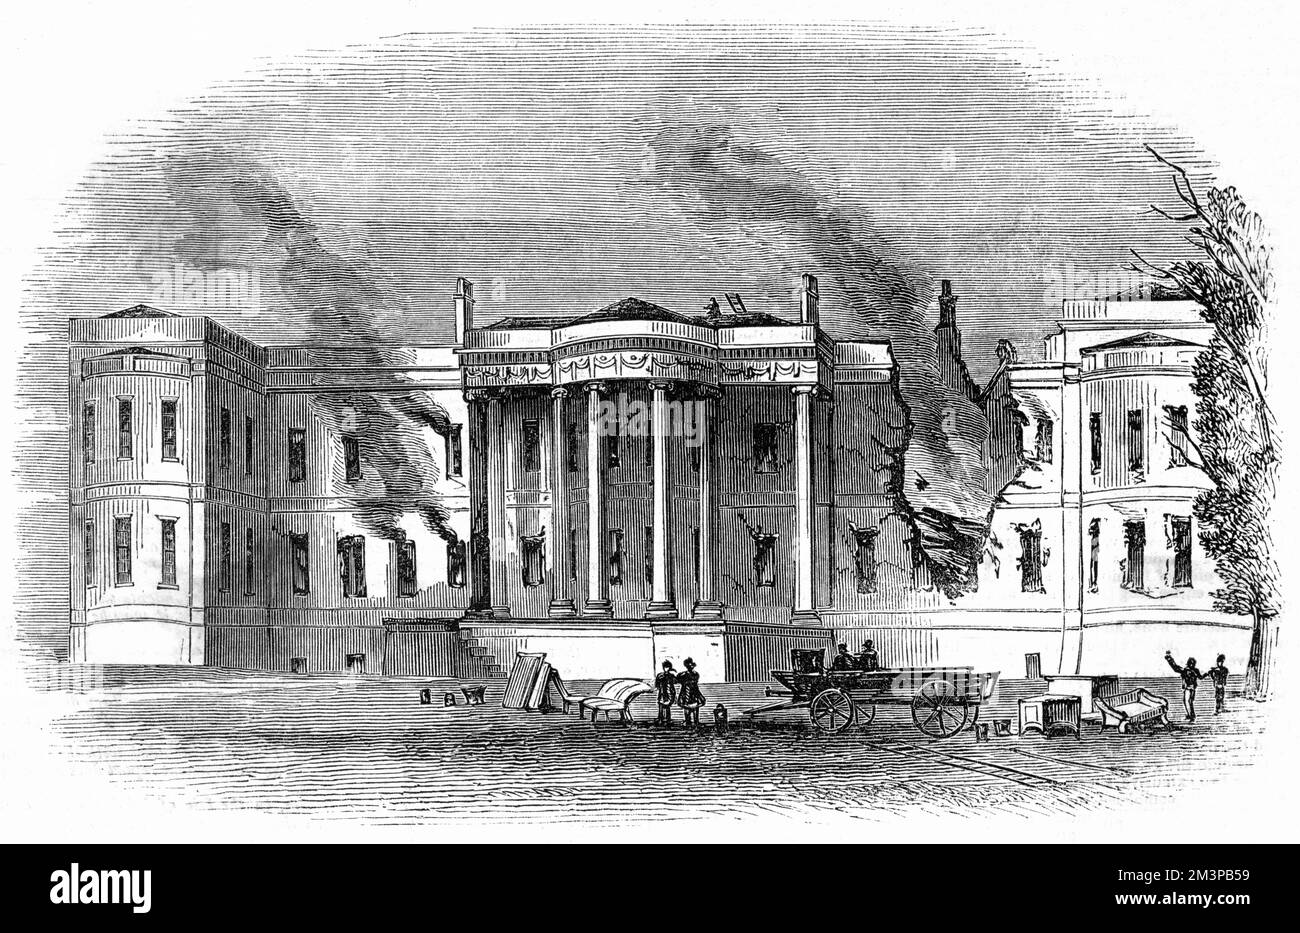 Luton Hoo, which straddles the Hertfordshire and Bedfordshire borders between the towns of Harpenden and Luton. In 1843 a devastating fire occurred and much of the house and its contents were destroyed. This engraving shows the aftermath (the scene the following morning) of the conflagration. Following the fire the house remained a burnt shell until the estate was sold in 1848.     Date: 1843 Stock Photo